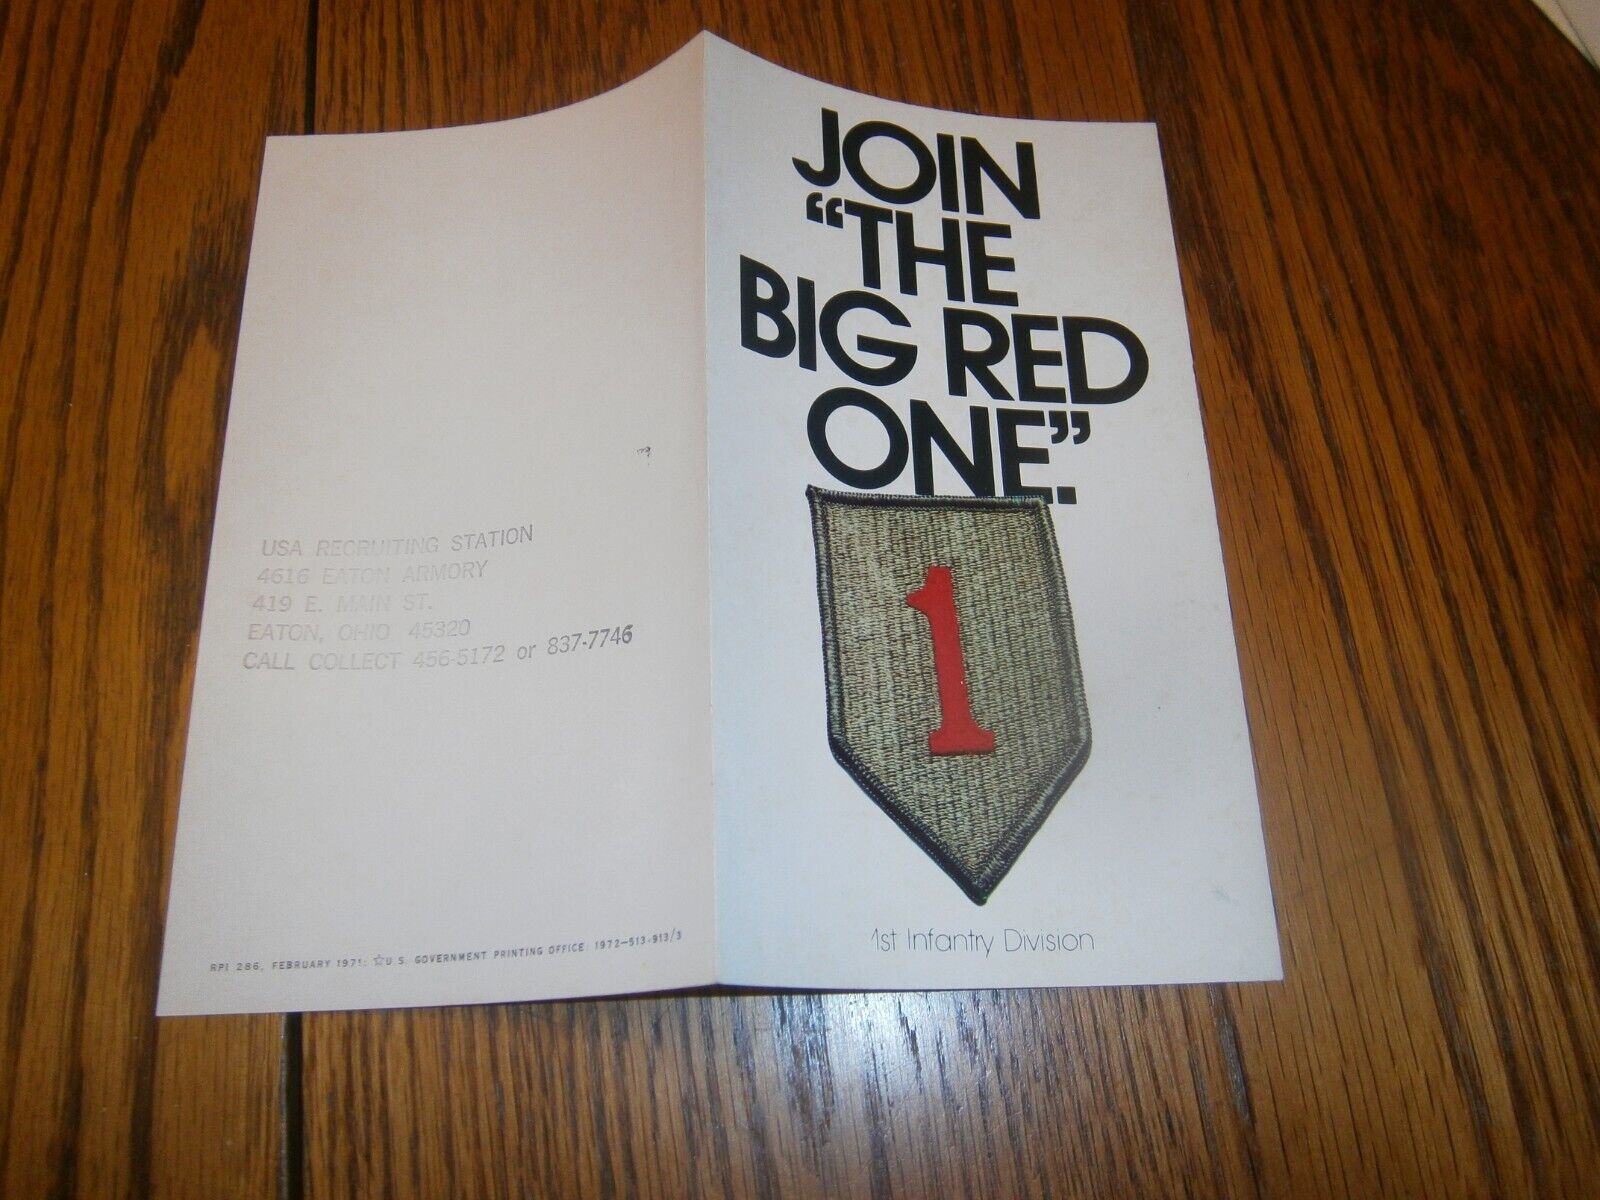 VINTAGE 1980'S JOIN THE BIG RED ONE 1ST INFANTRY DIVISION BROCHURE